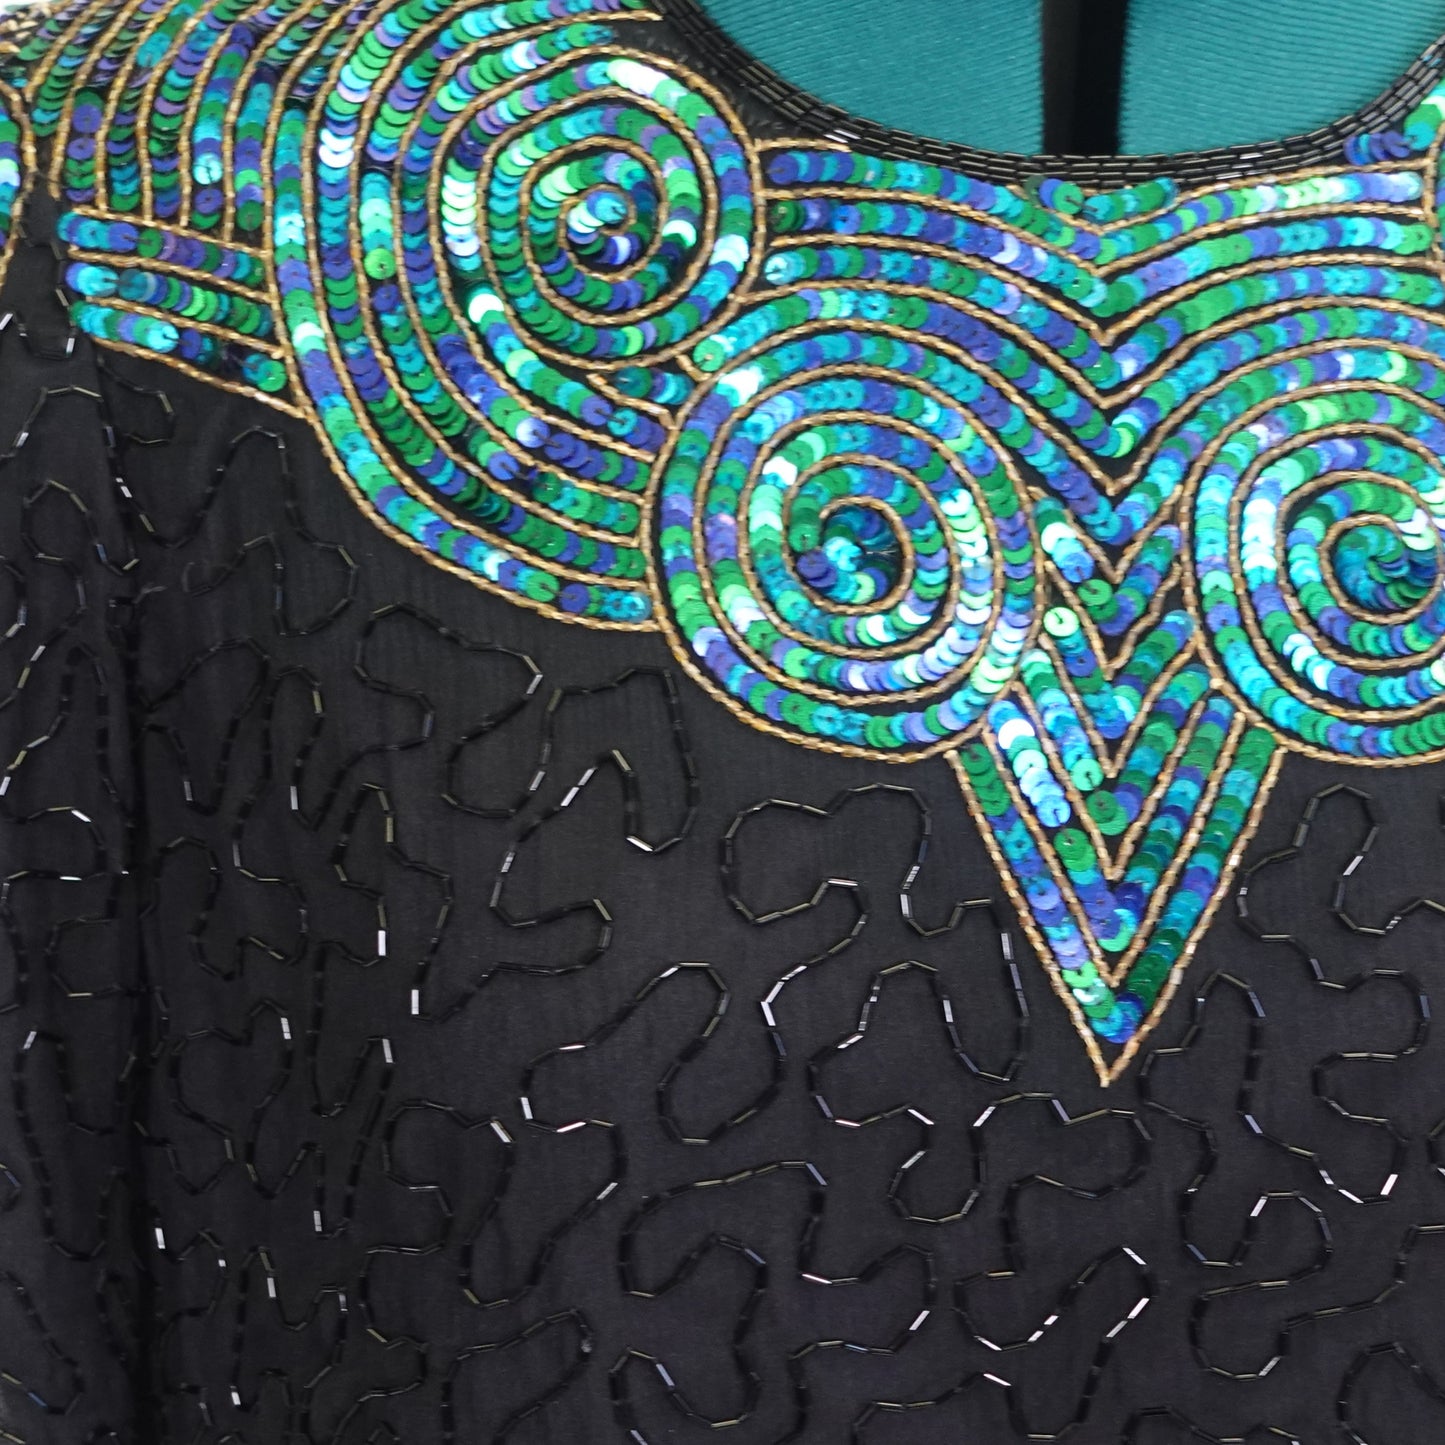 Vintage Black Beaded Top with Multicolor Details